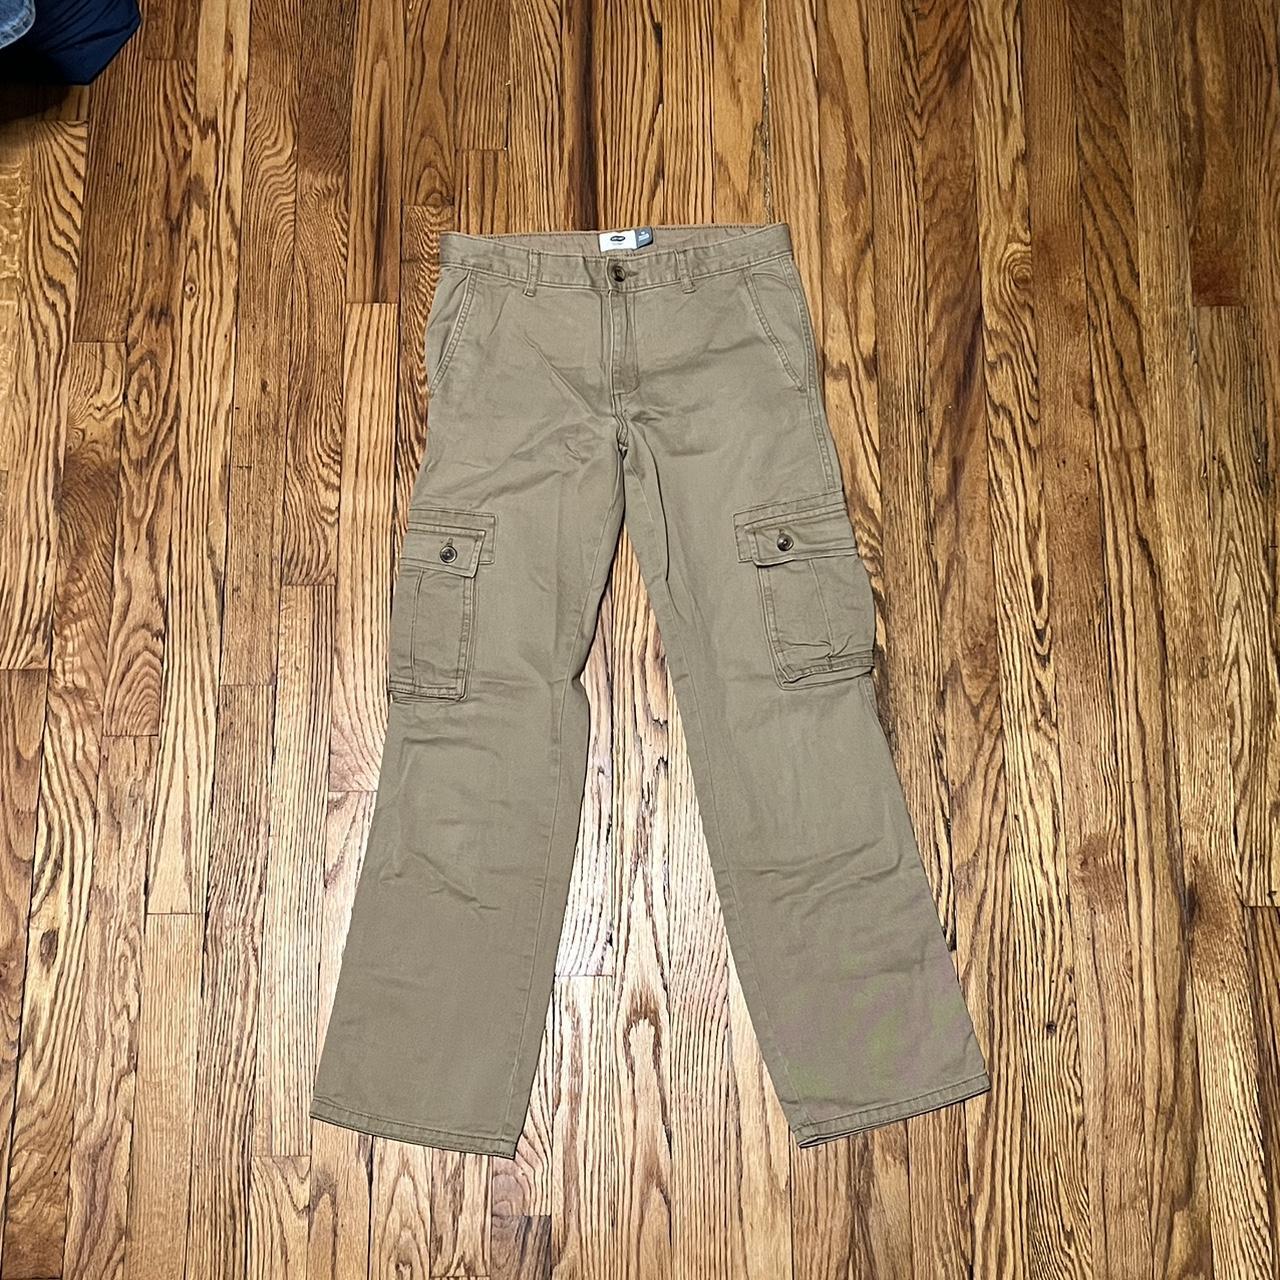 CARGOS OLD NAVY PANTS🔥, Men's Fashion, Bottoms, Trousers on Carousell